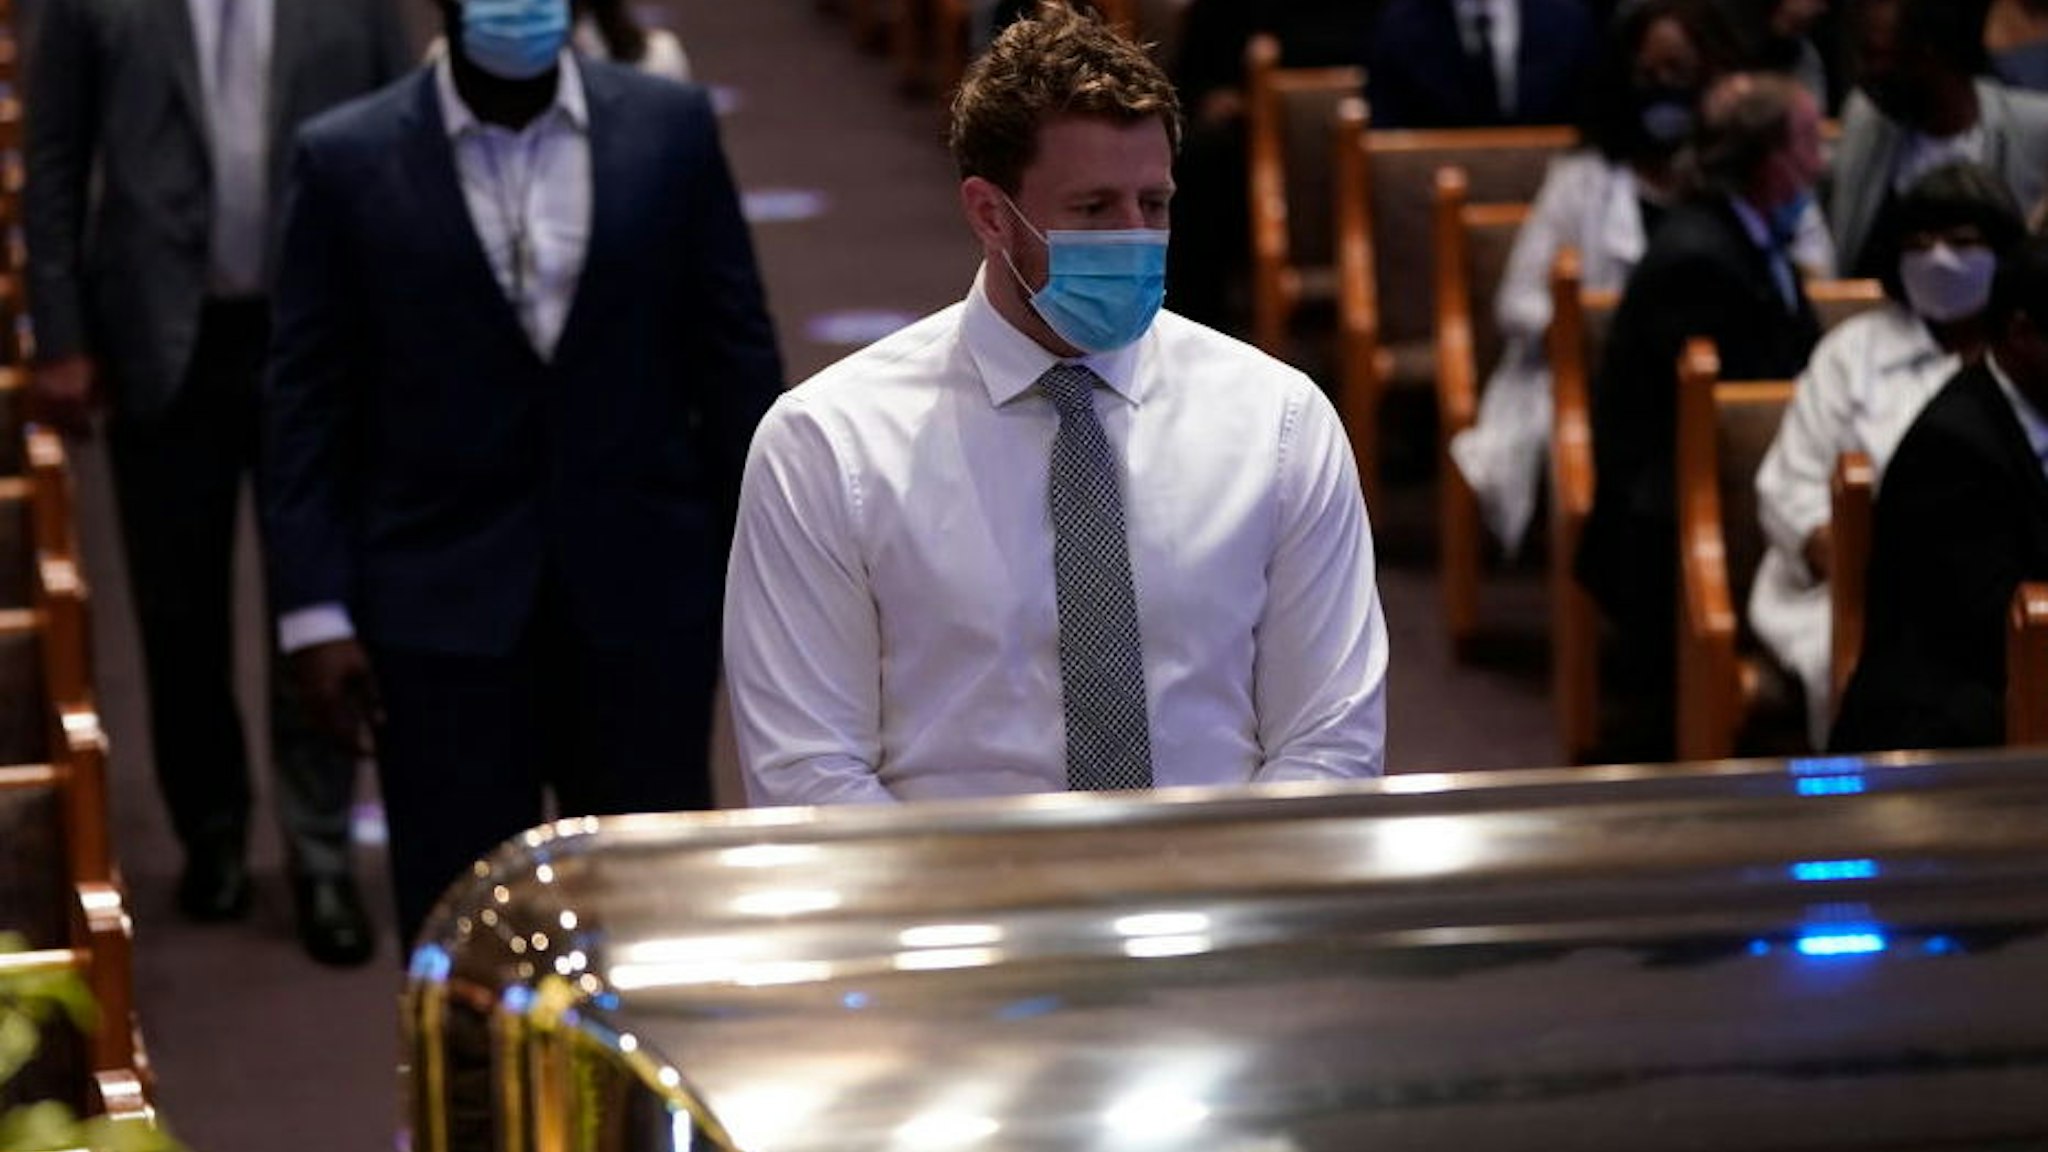 J.J. Watt of the NFL Houston Texans pauses at the casket bearing the remains of George Floyd in the chapel during his funeral service at the Fountain of Praise church June 9, 2020 in Houston, Texas.